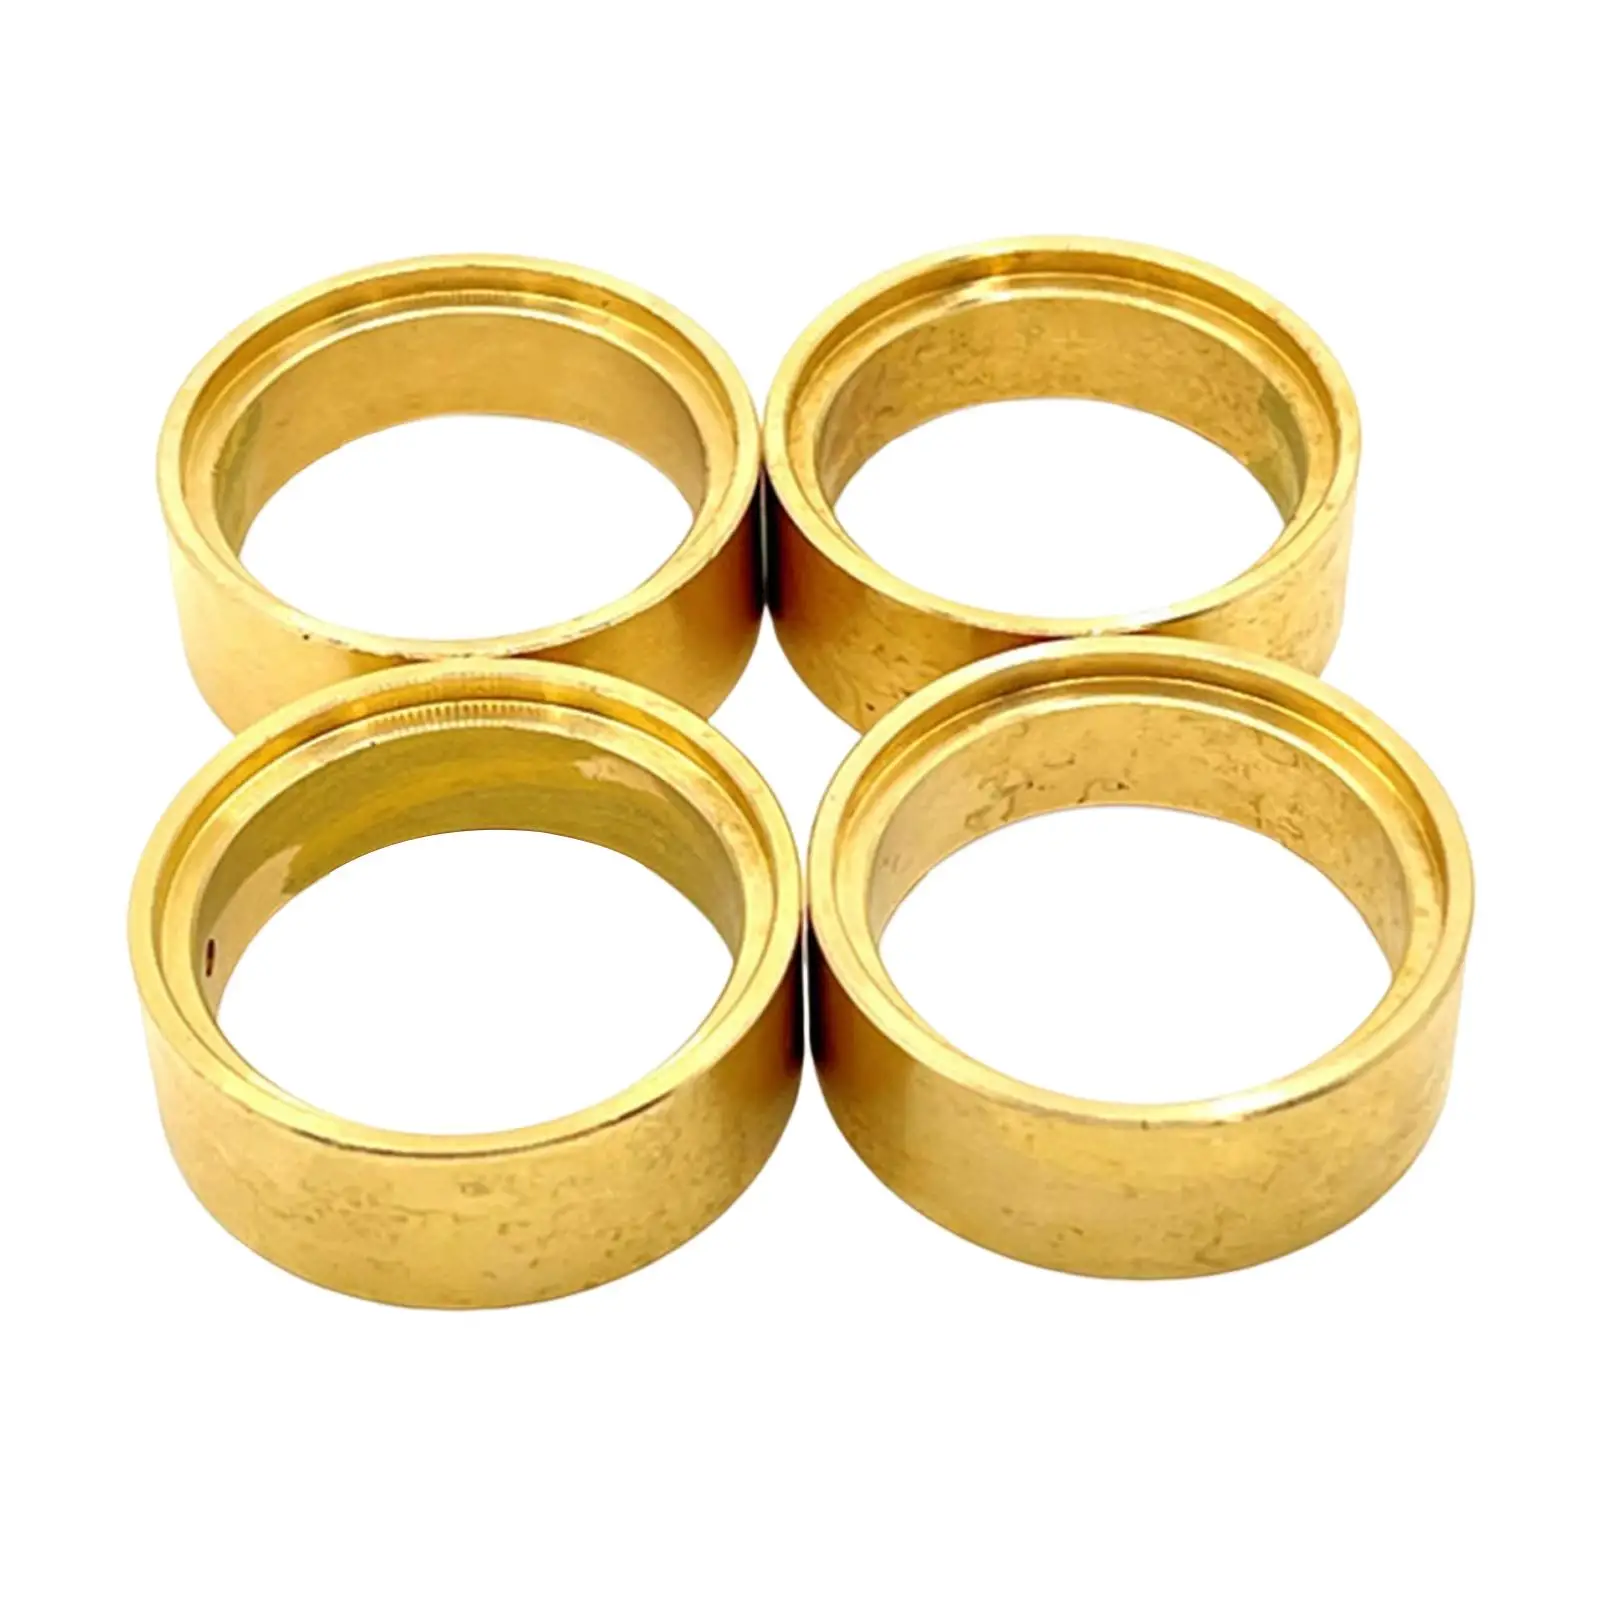 1:24Scale RC Brass Wheel Weights Wheel Rims Hubs Counterweight for Fcx24 Hobby Car Model Buggy Vehicles DIY Accessories